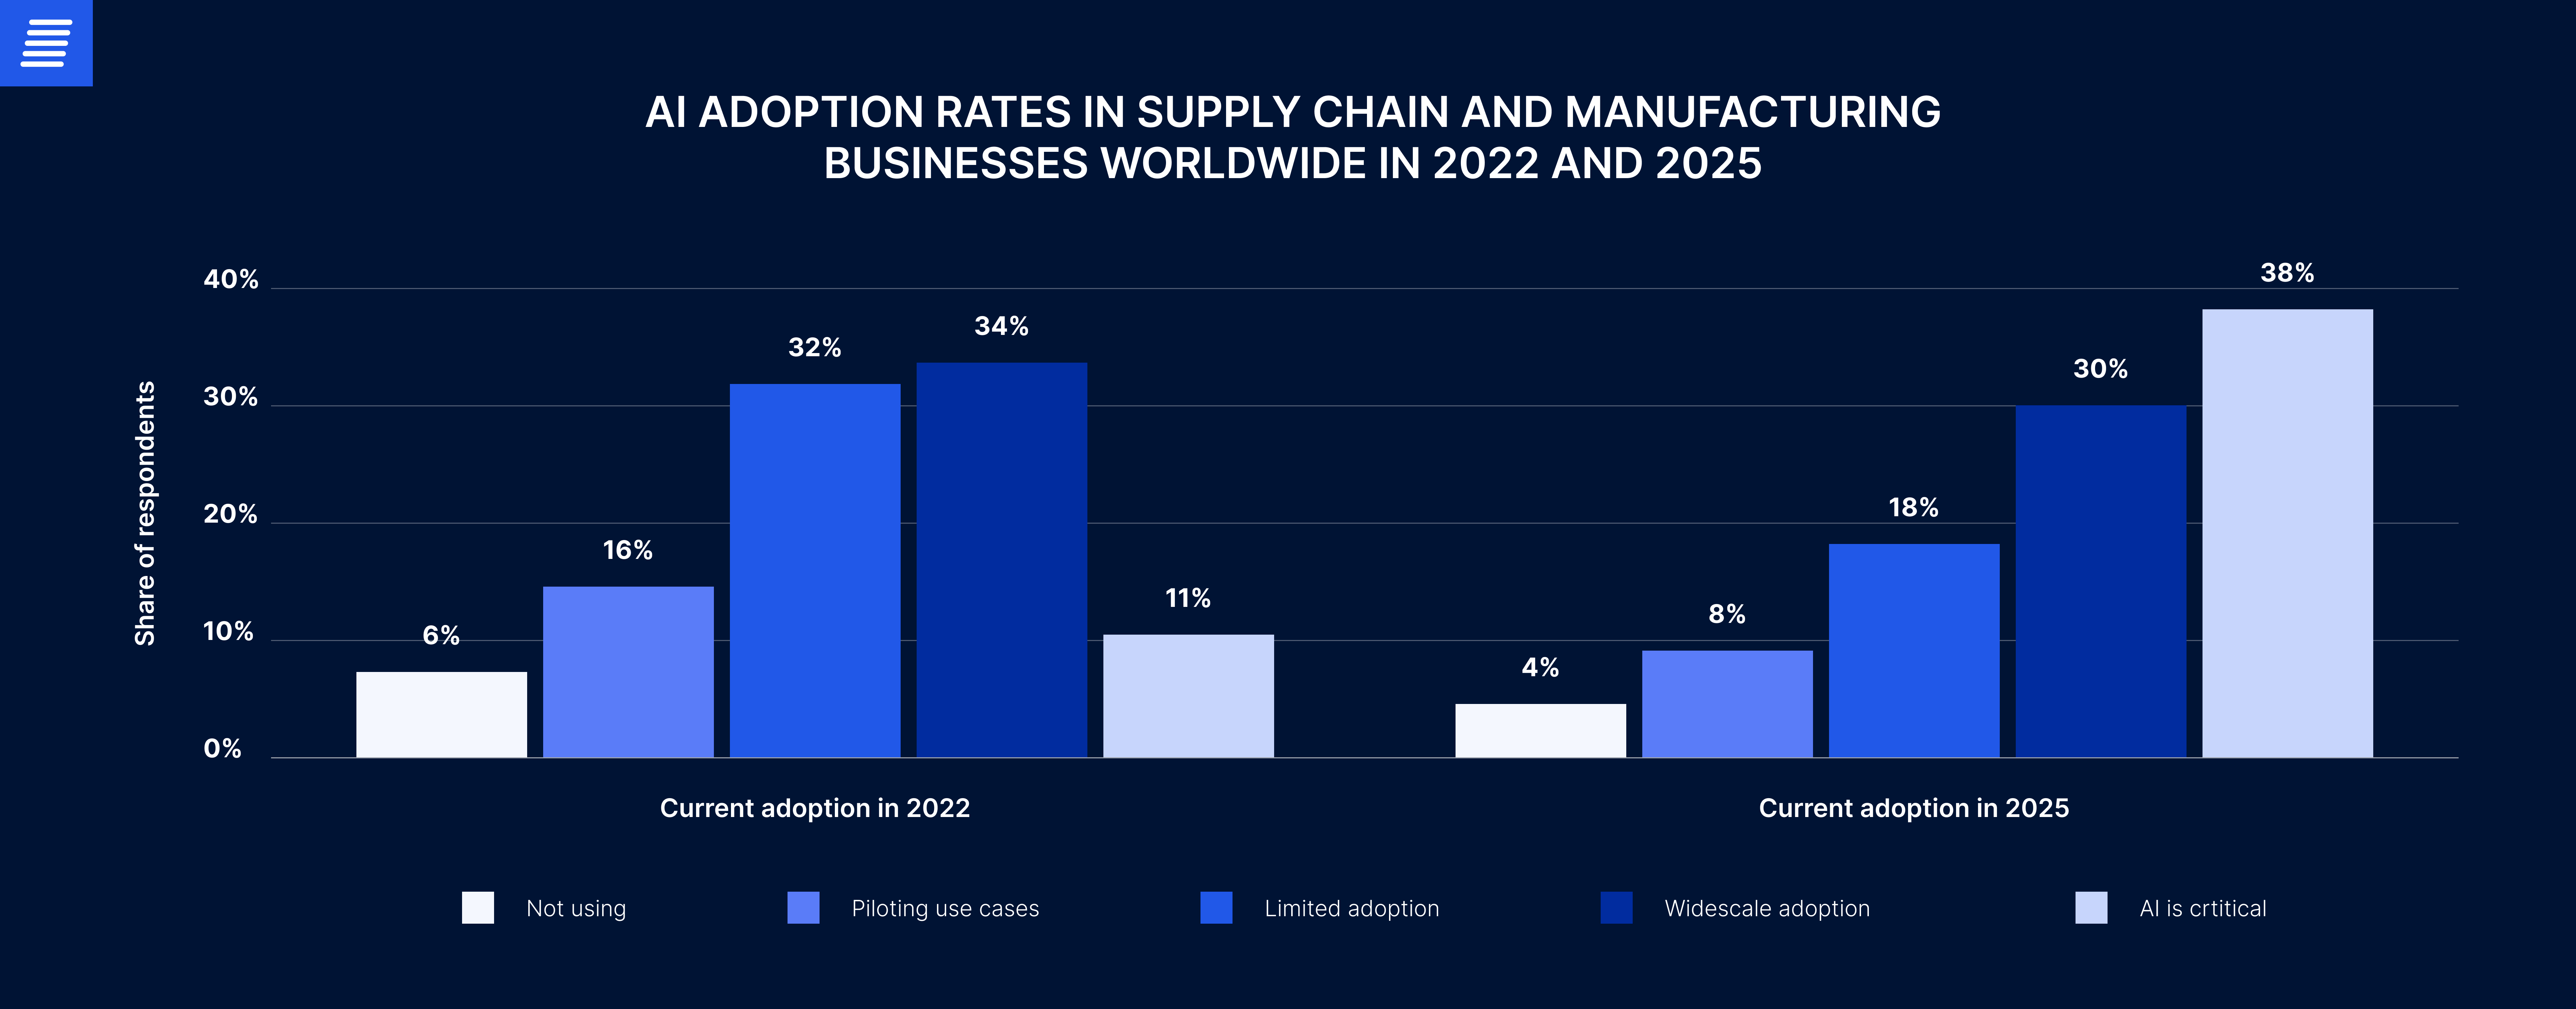 ai-adoption-rate-in-supply-chains-and-manufacturing-industries